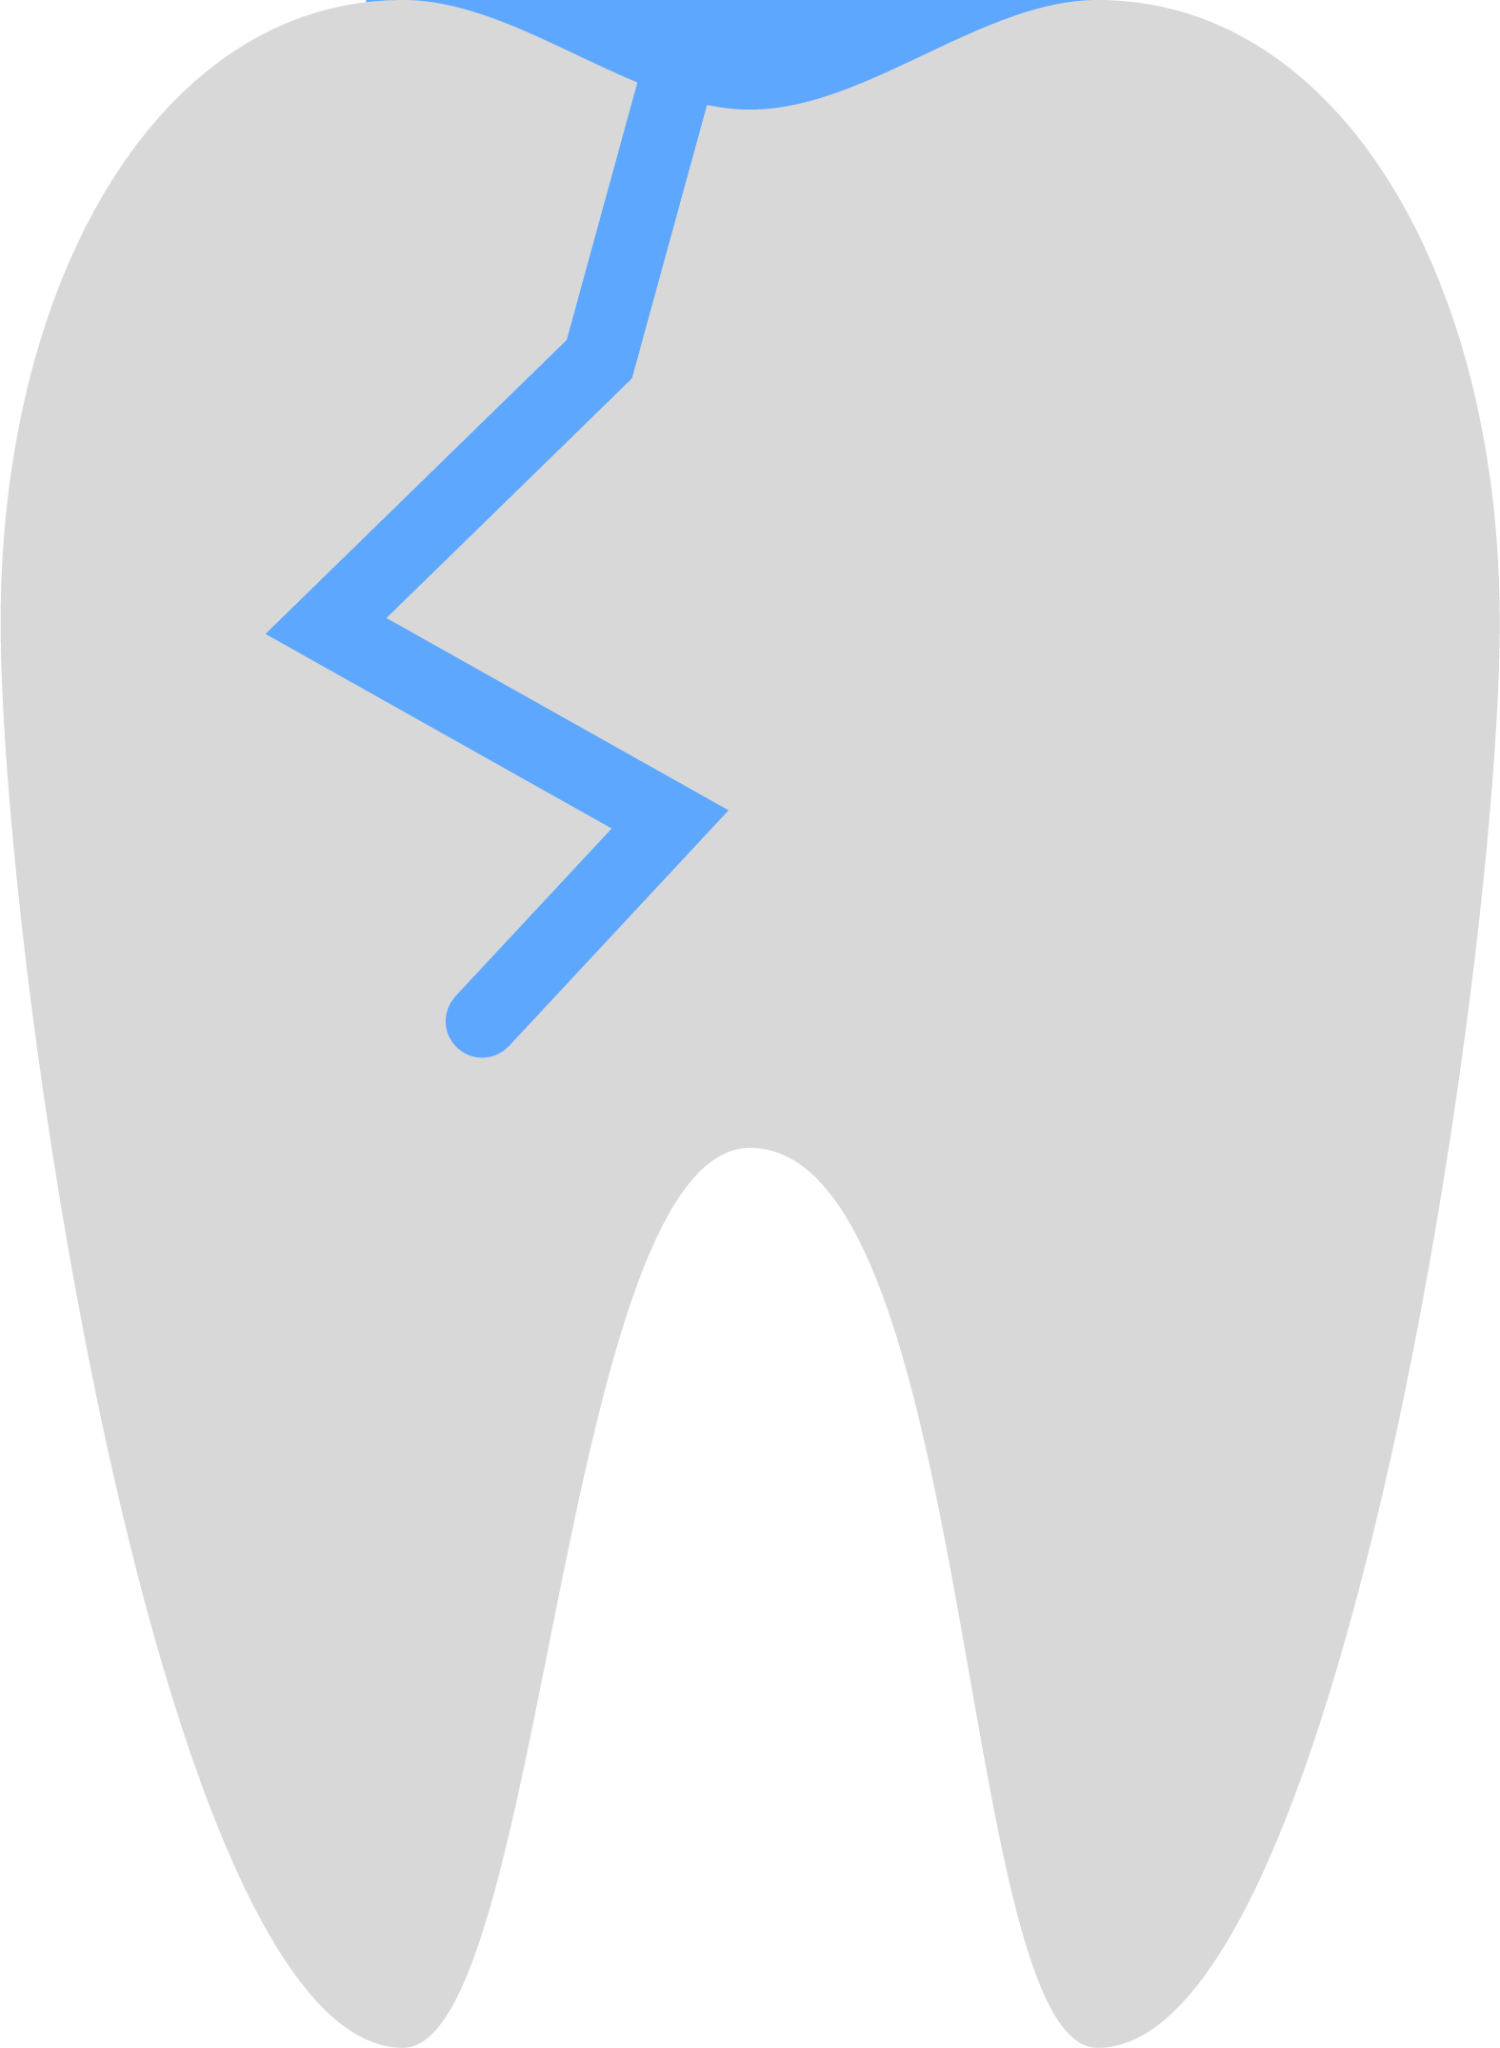 tooth repair 3 icon